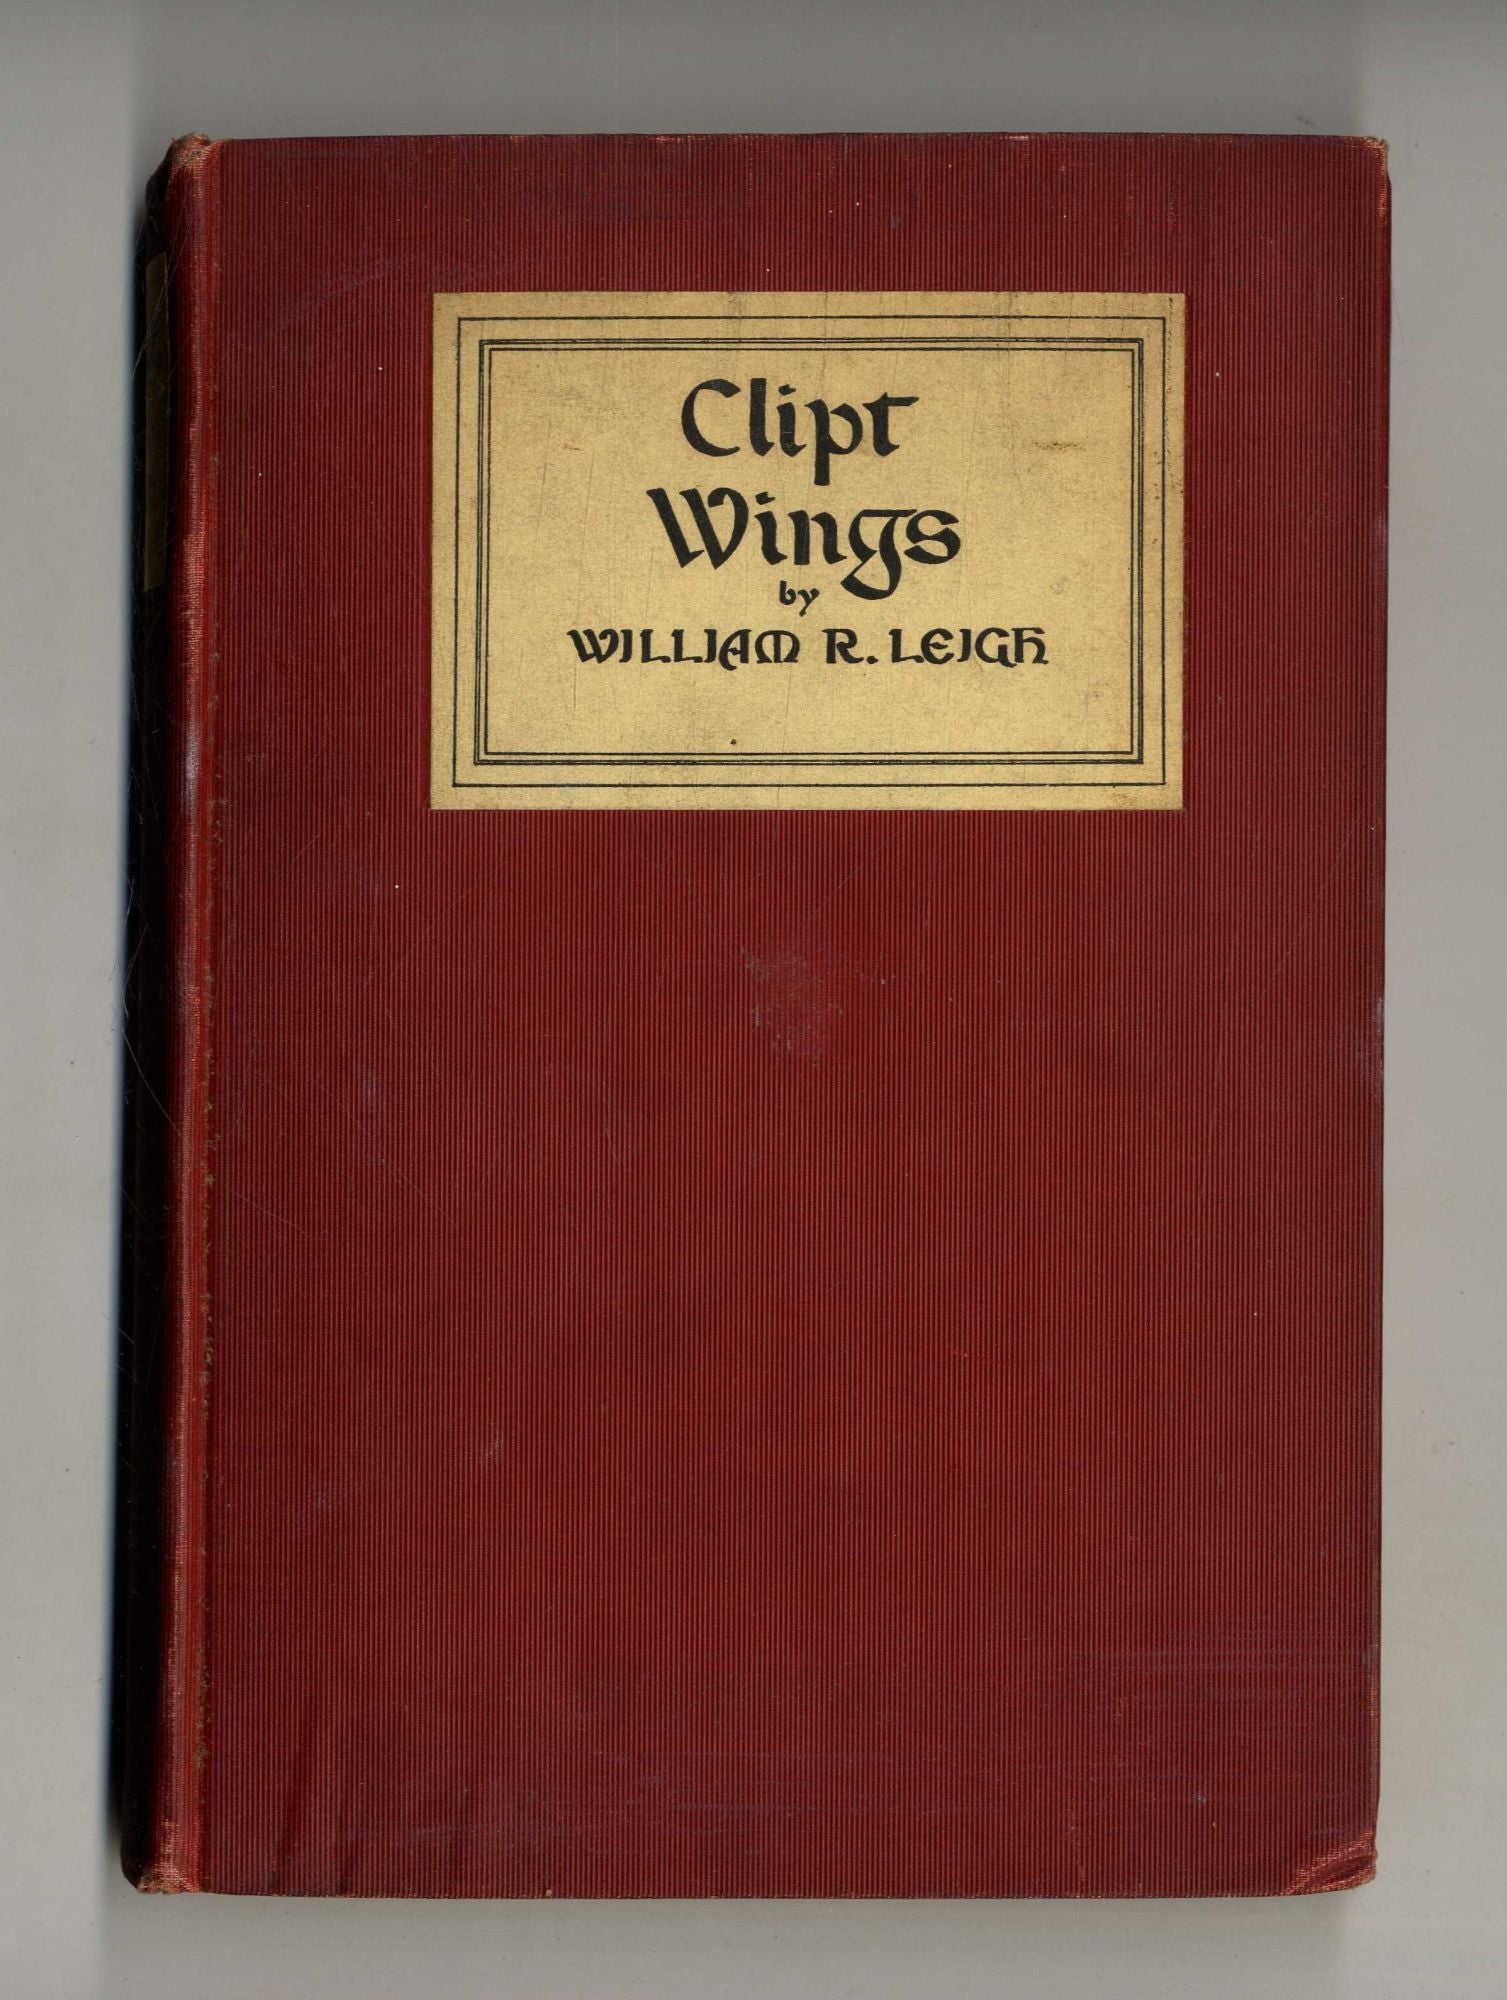 Book #160133 Clipt Wings A Drama in Five Acts. William R. Leigh.